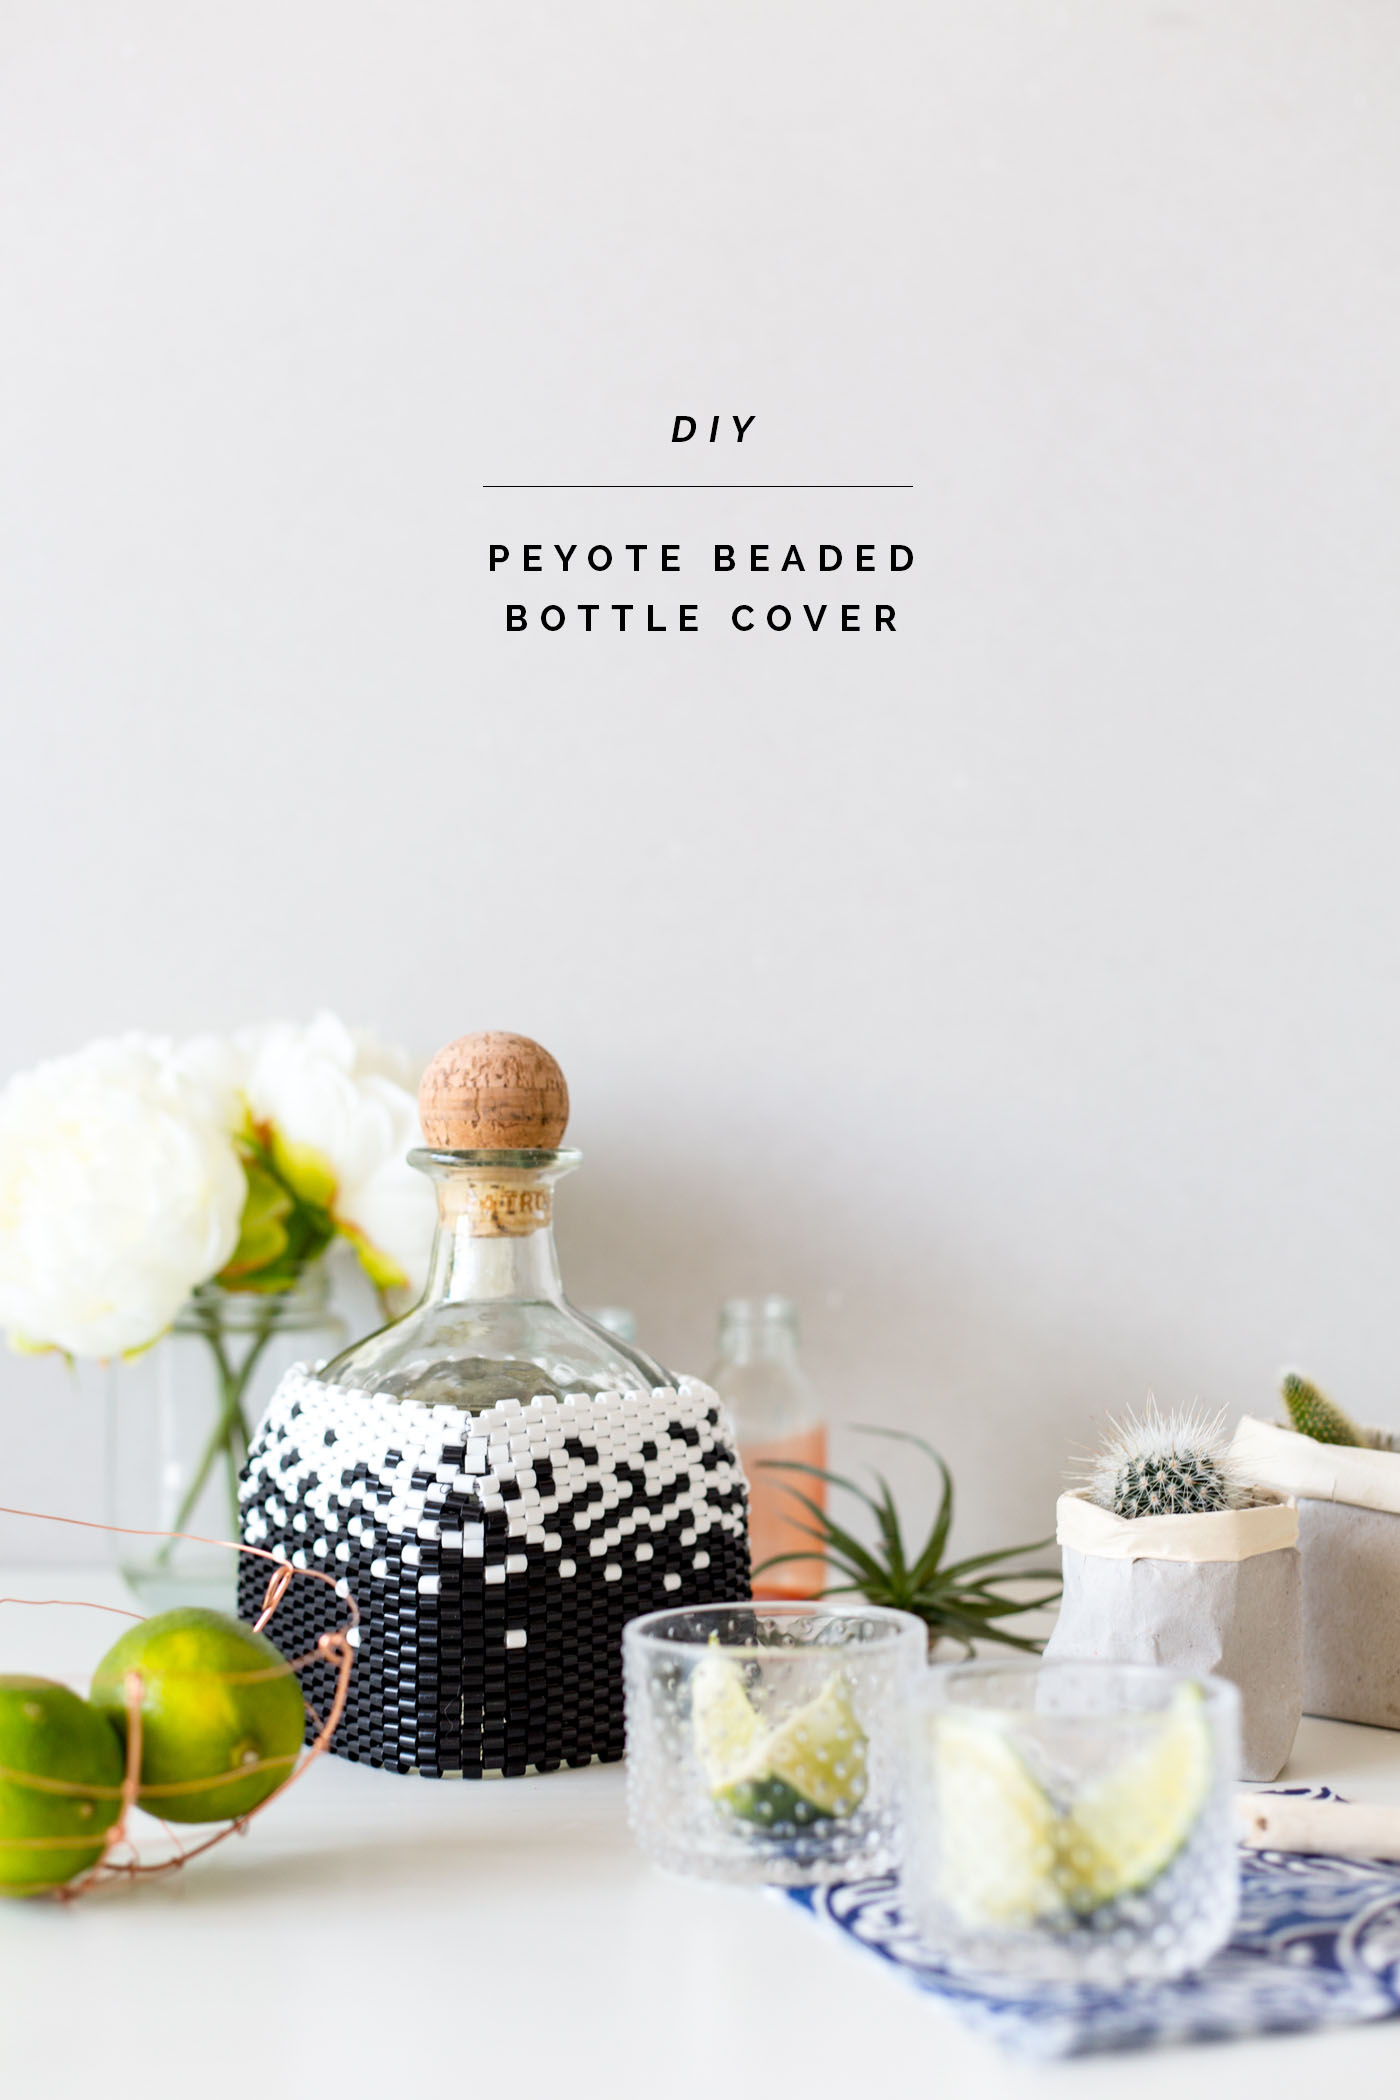 diy-beaded-bottle-cover-in-peyote-stitch-with-tutorial-fallfordiy